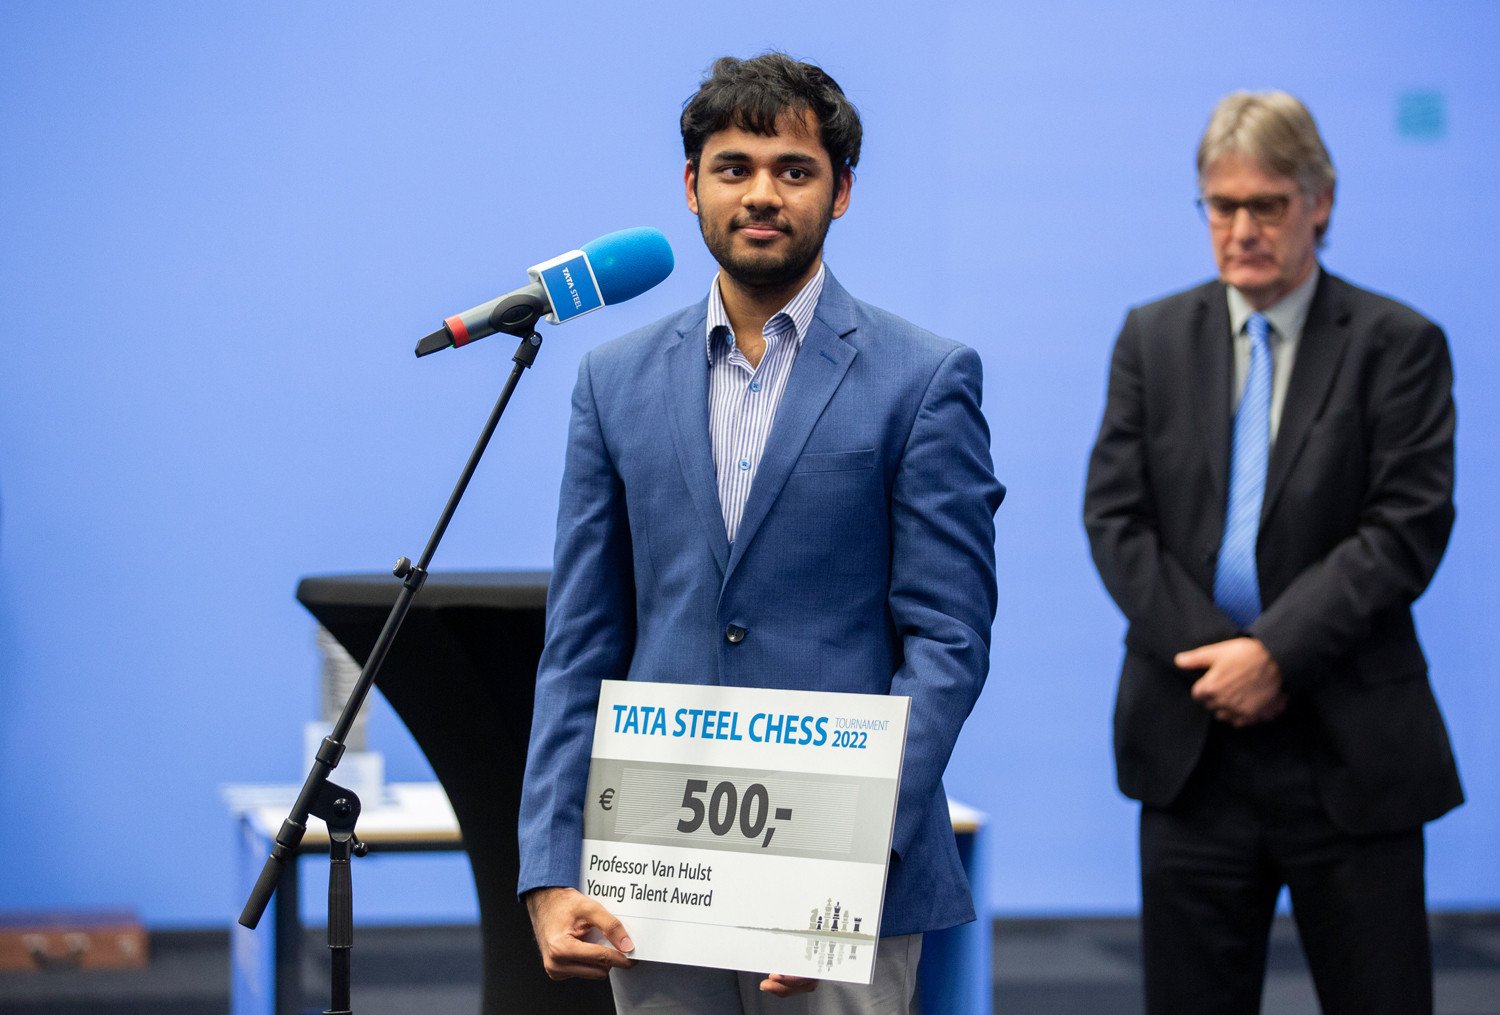 2022 Tata Steel Chess Tournament is over with Carlsen, Mamedyarov, and  Rapport forming the top3